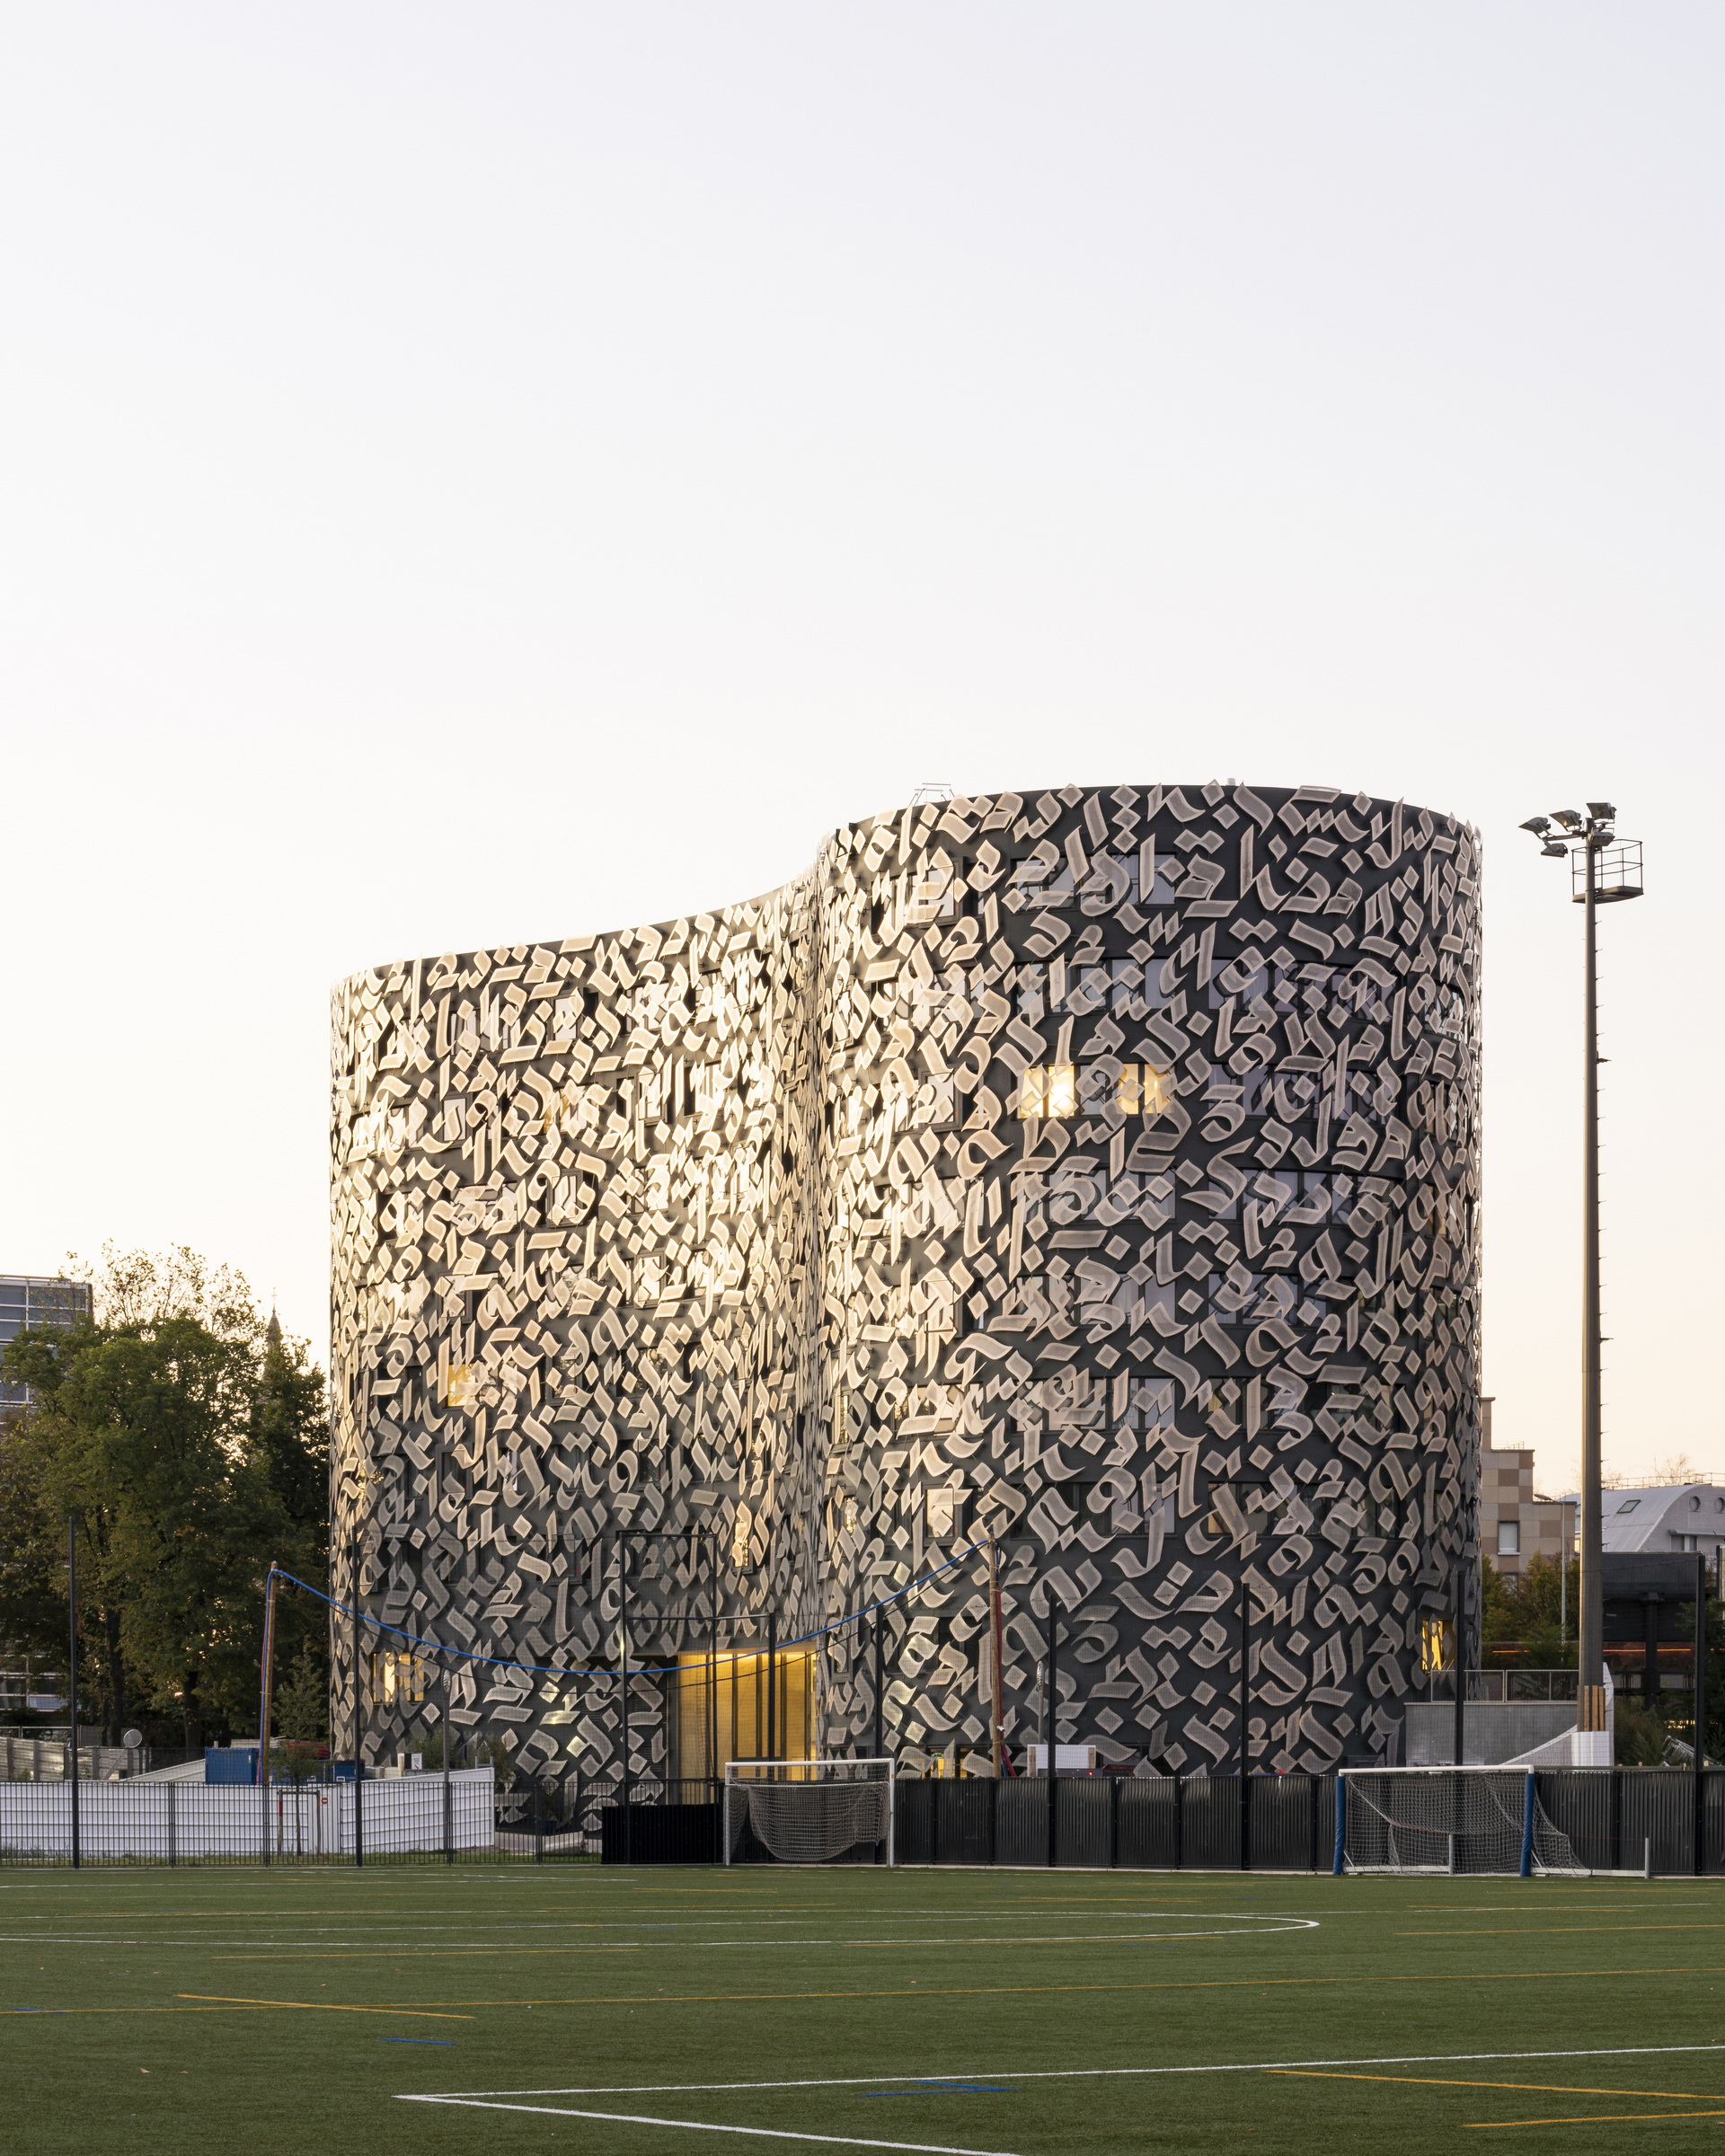 Habib Bourguiba Pavilion - <p>An aluminium double skin surrounds the building and serves as a mesh or mashrabiyya for protection against sun and noise from a nearby vehicular road; patterning of the aluminium is based on a work of Arabic calligraphy by the noted Tunisian artist Shoof.</p>